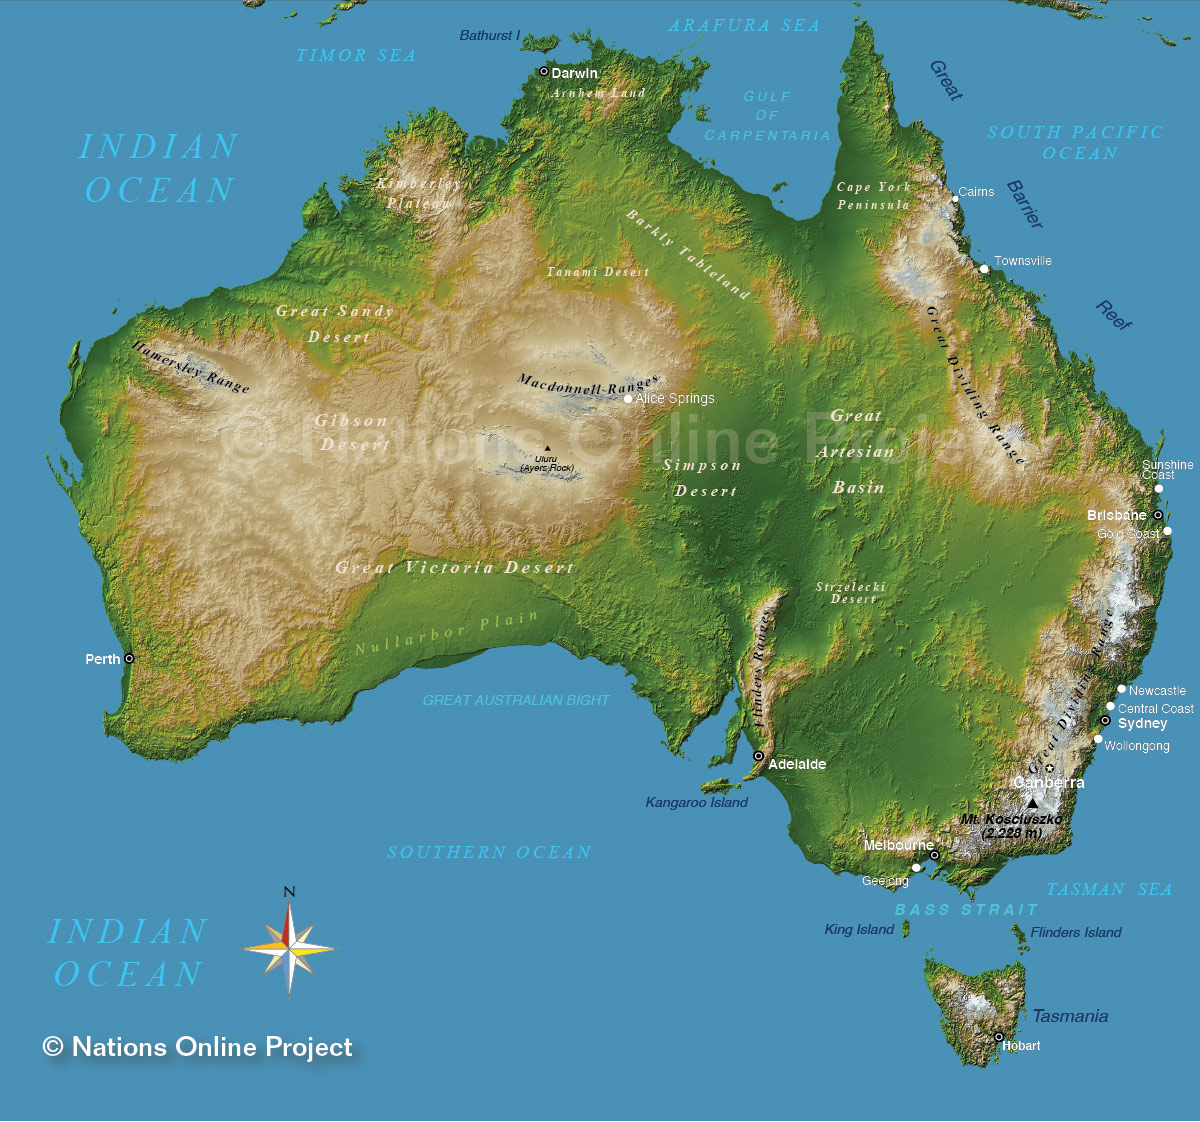 Topographic Map of Australia - Nations Online Project